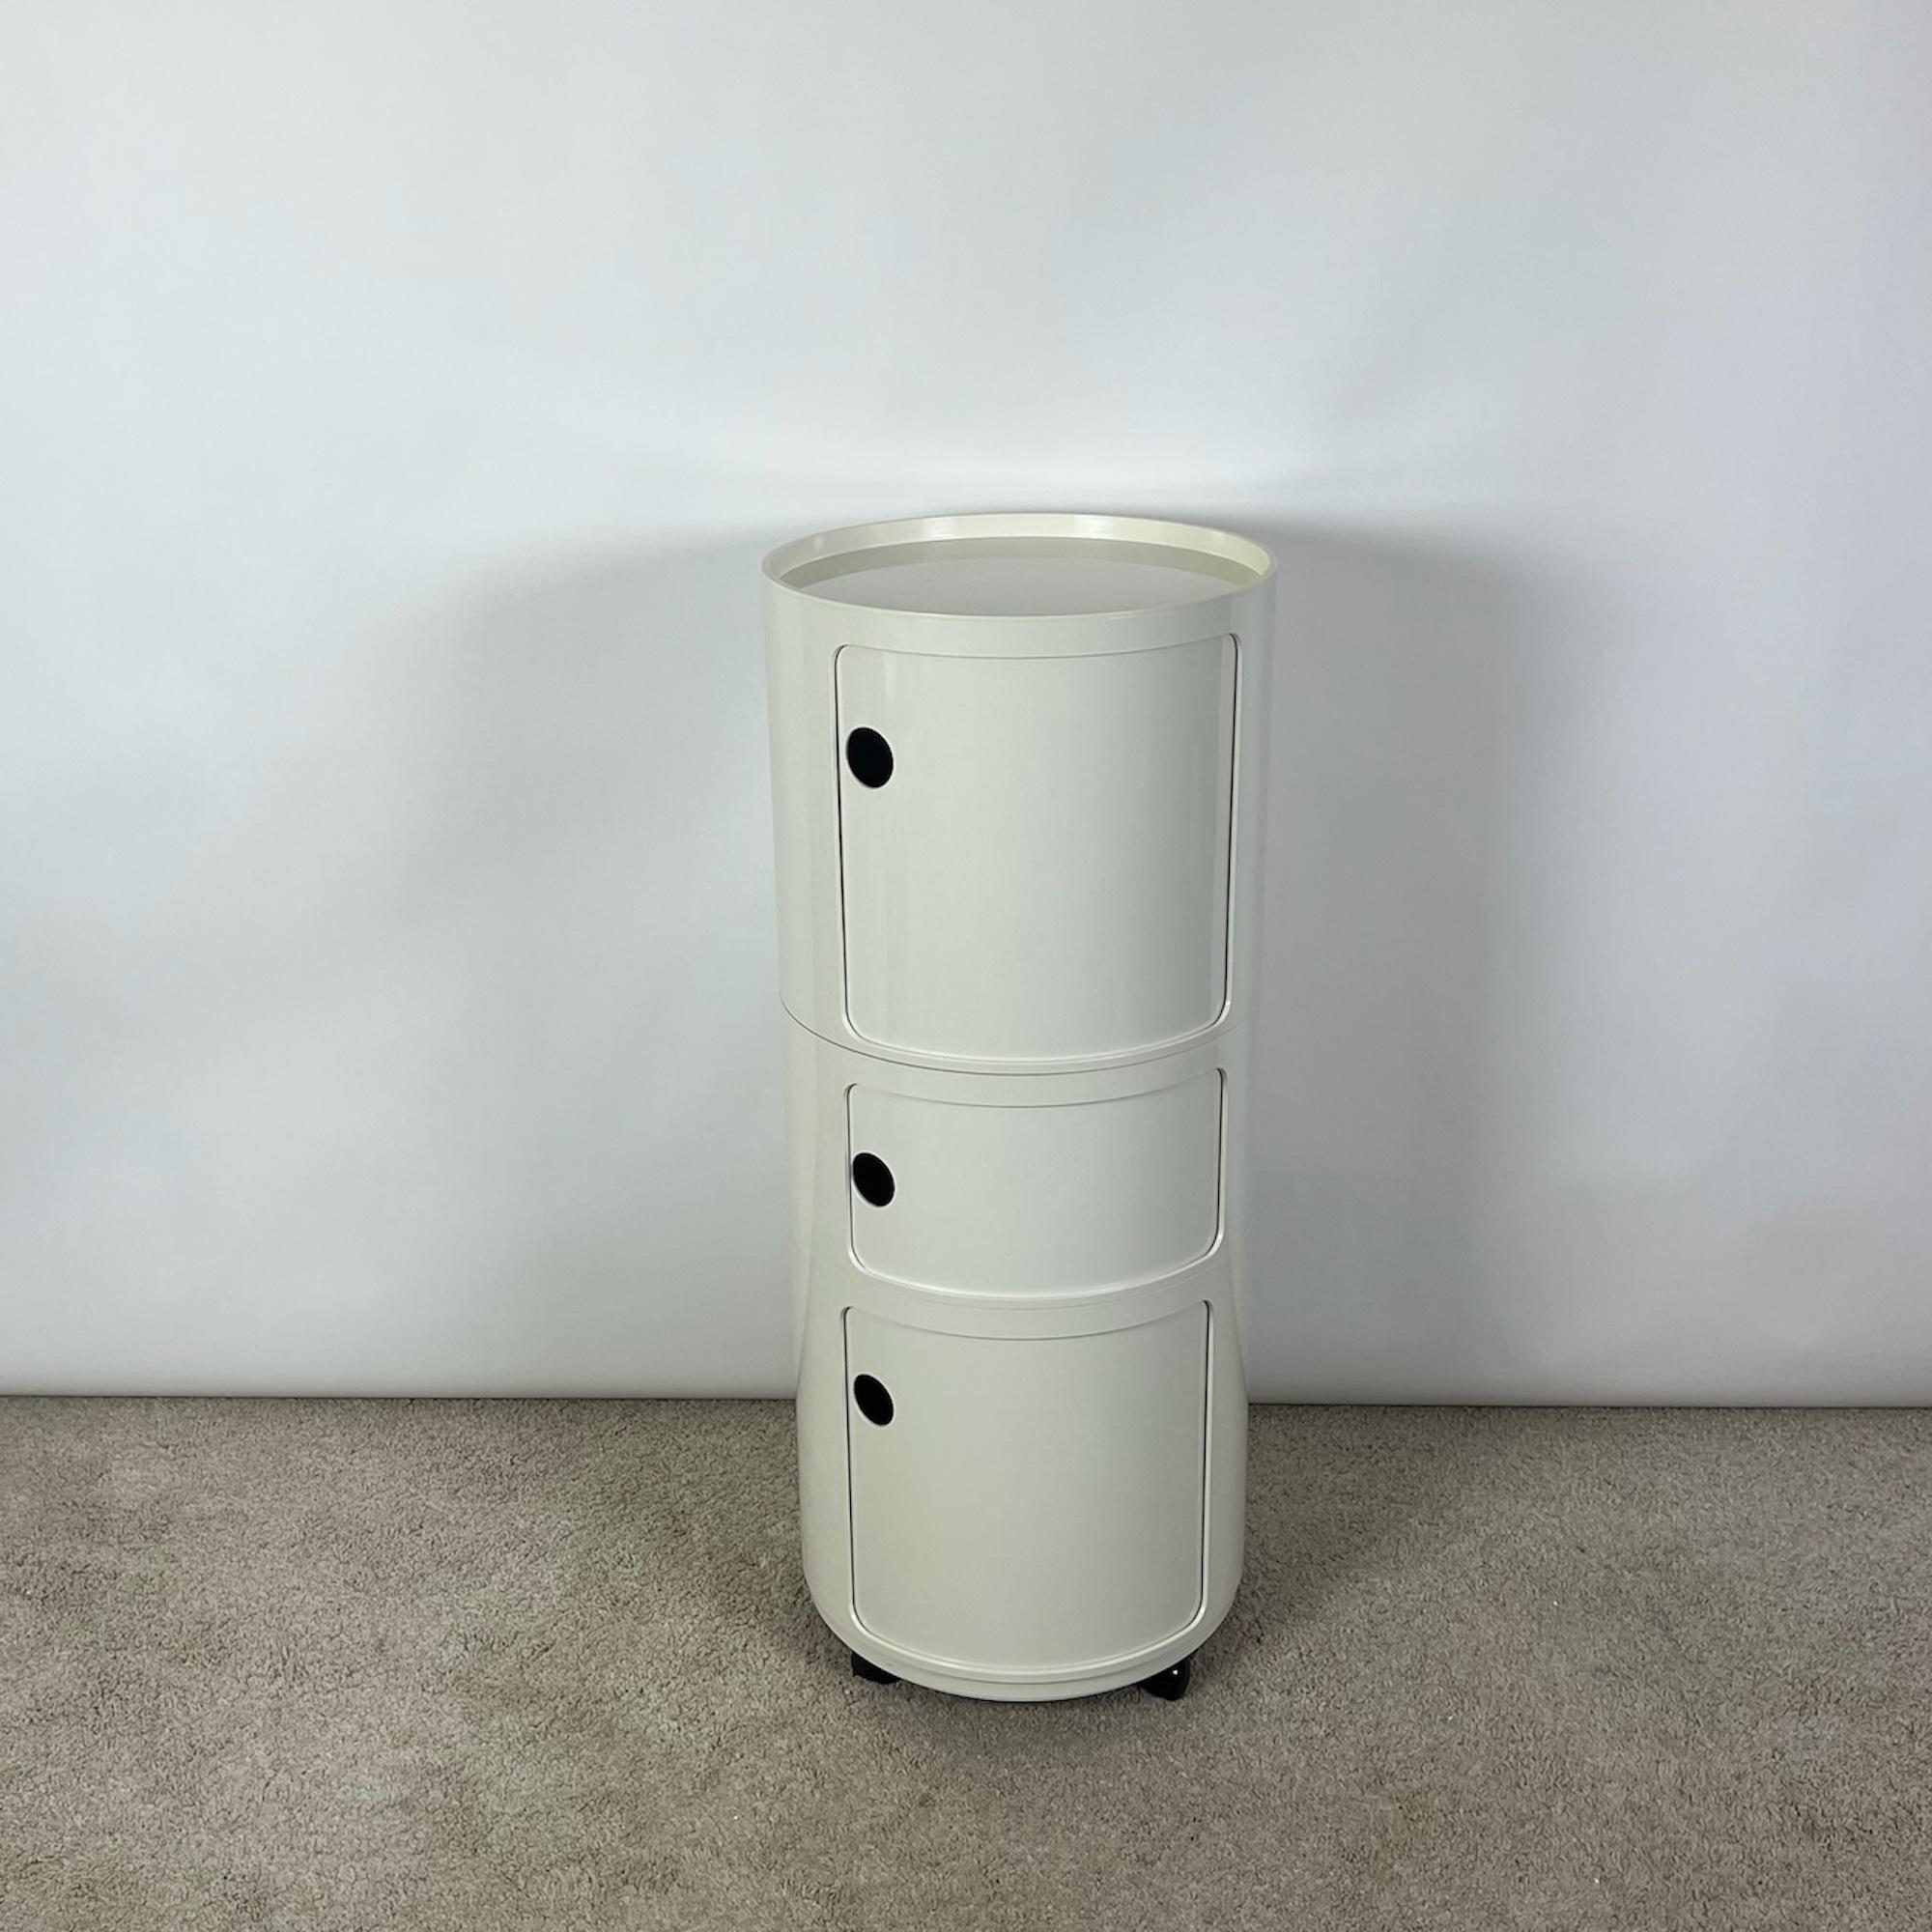 ORDER
NOW
Ultra rare round storage cabinet column on wheels designed by Anna Castelli Ferrieri and manufactured by Kartell in the 60s.

This column is composed of three round modules with curved doors – two with 39 cm height and one with 21 cm